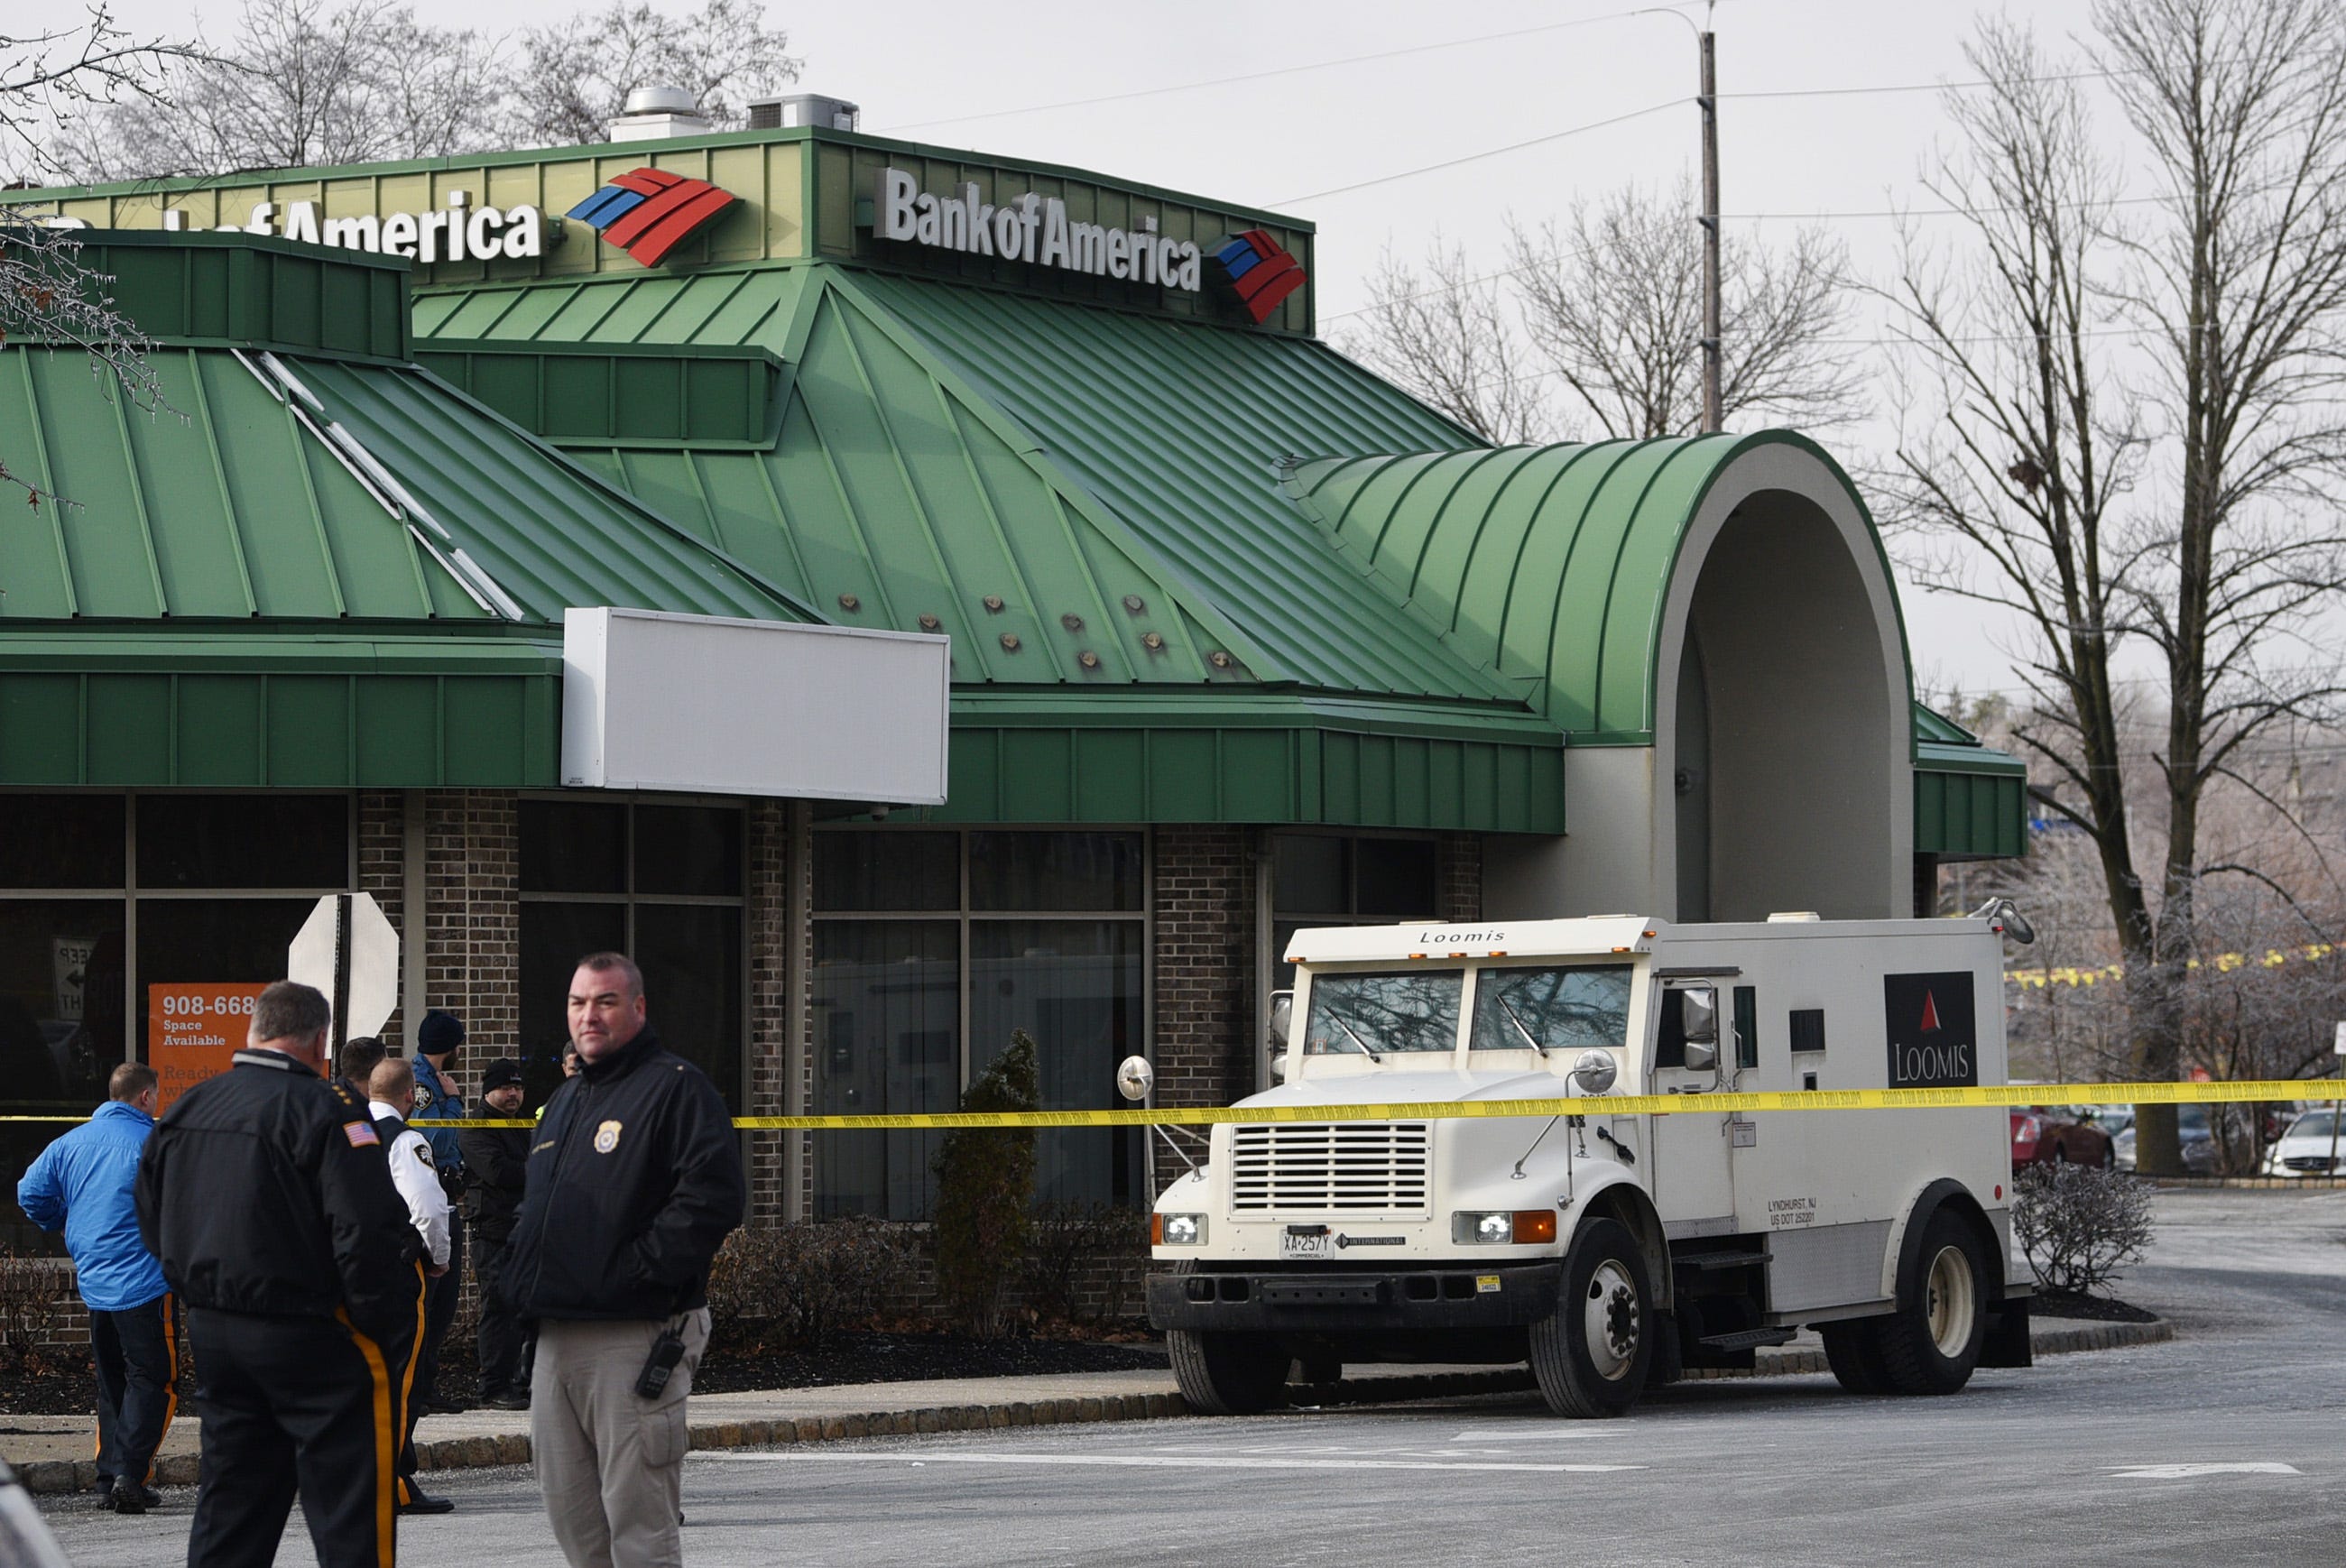 Robbery attempt at Bank of America in Wayne NJ ends with suspect shot